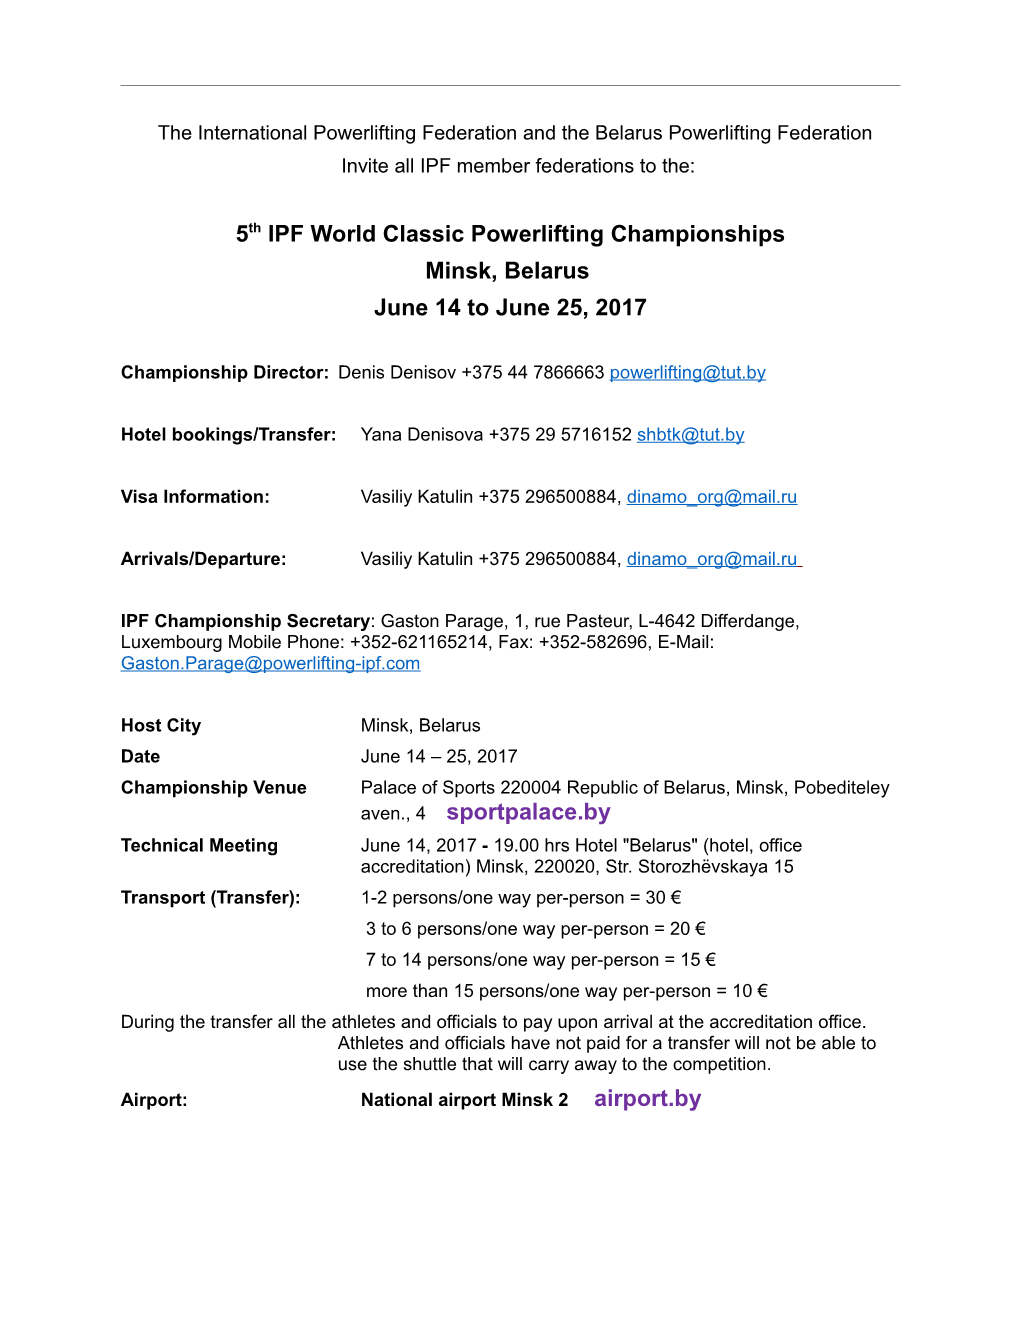 The International Powerlifting Federation and the Belarus Powerlifting Federation